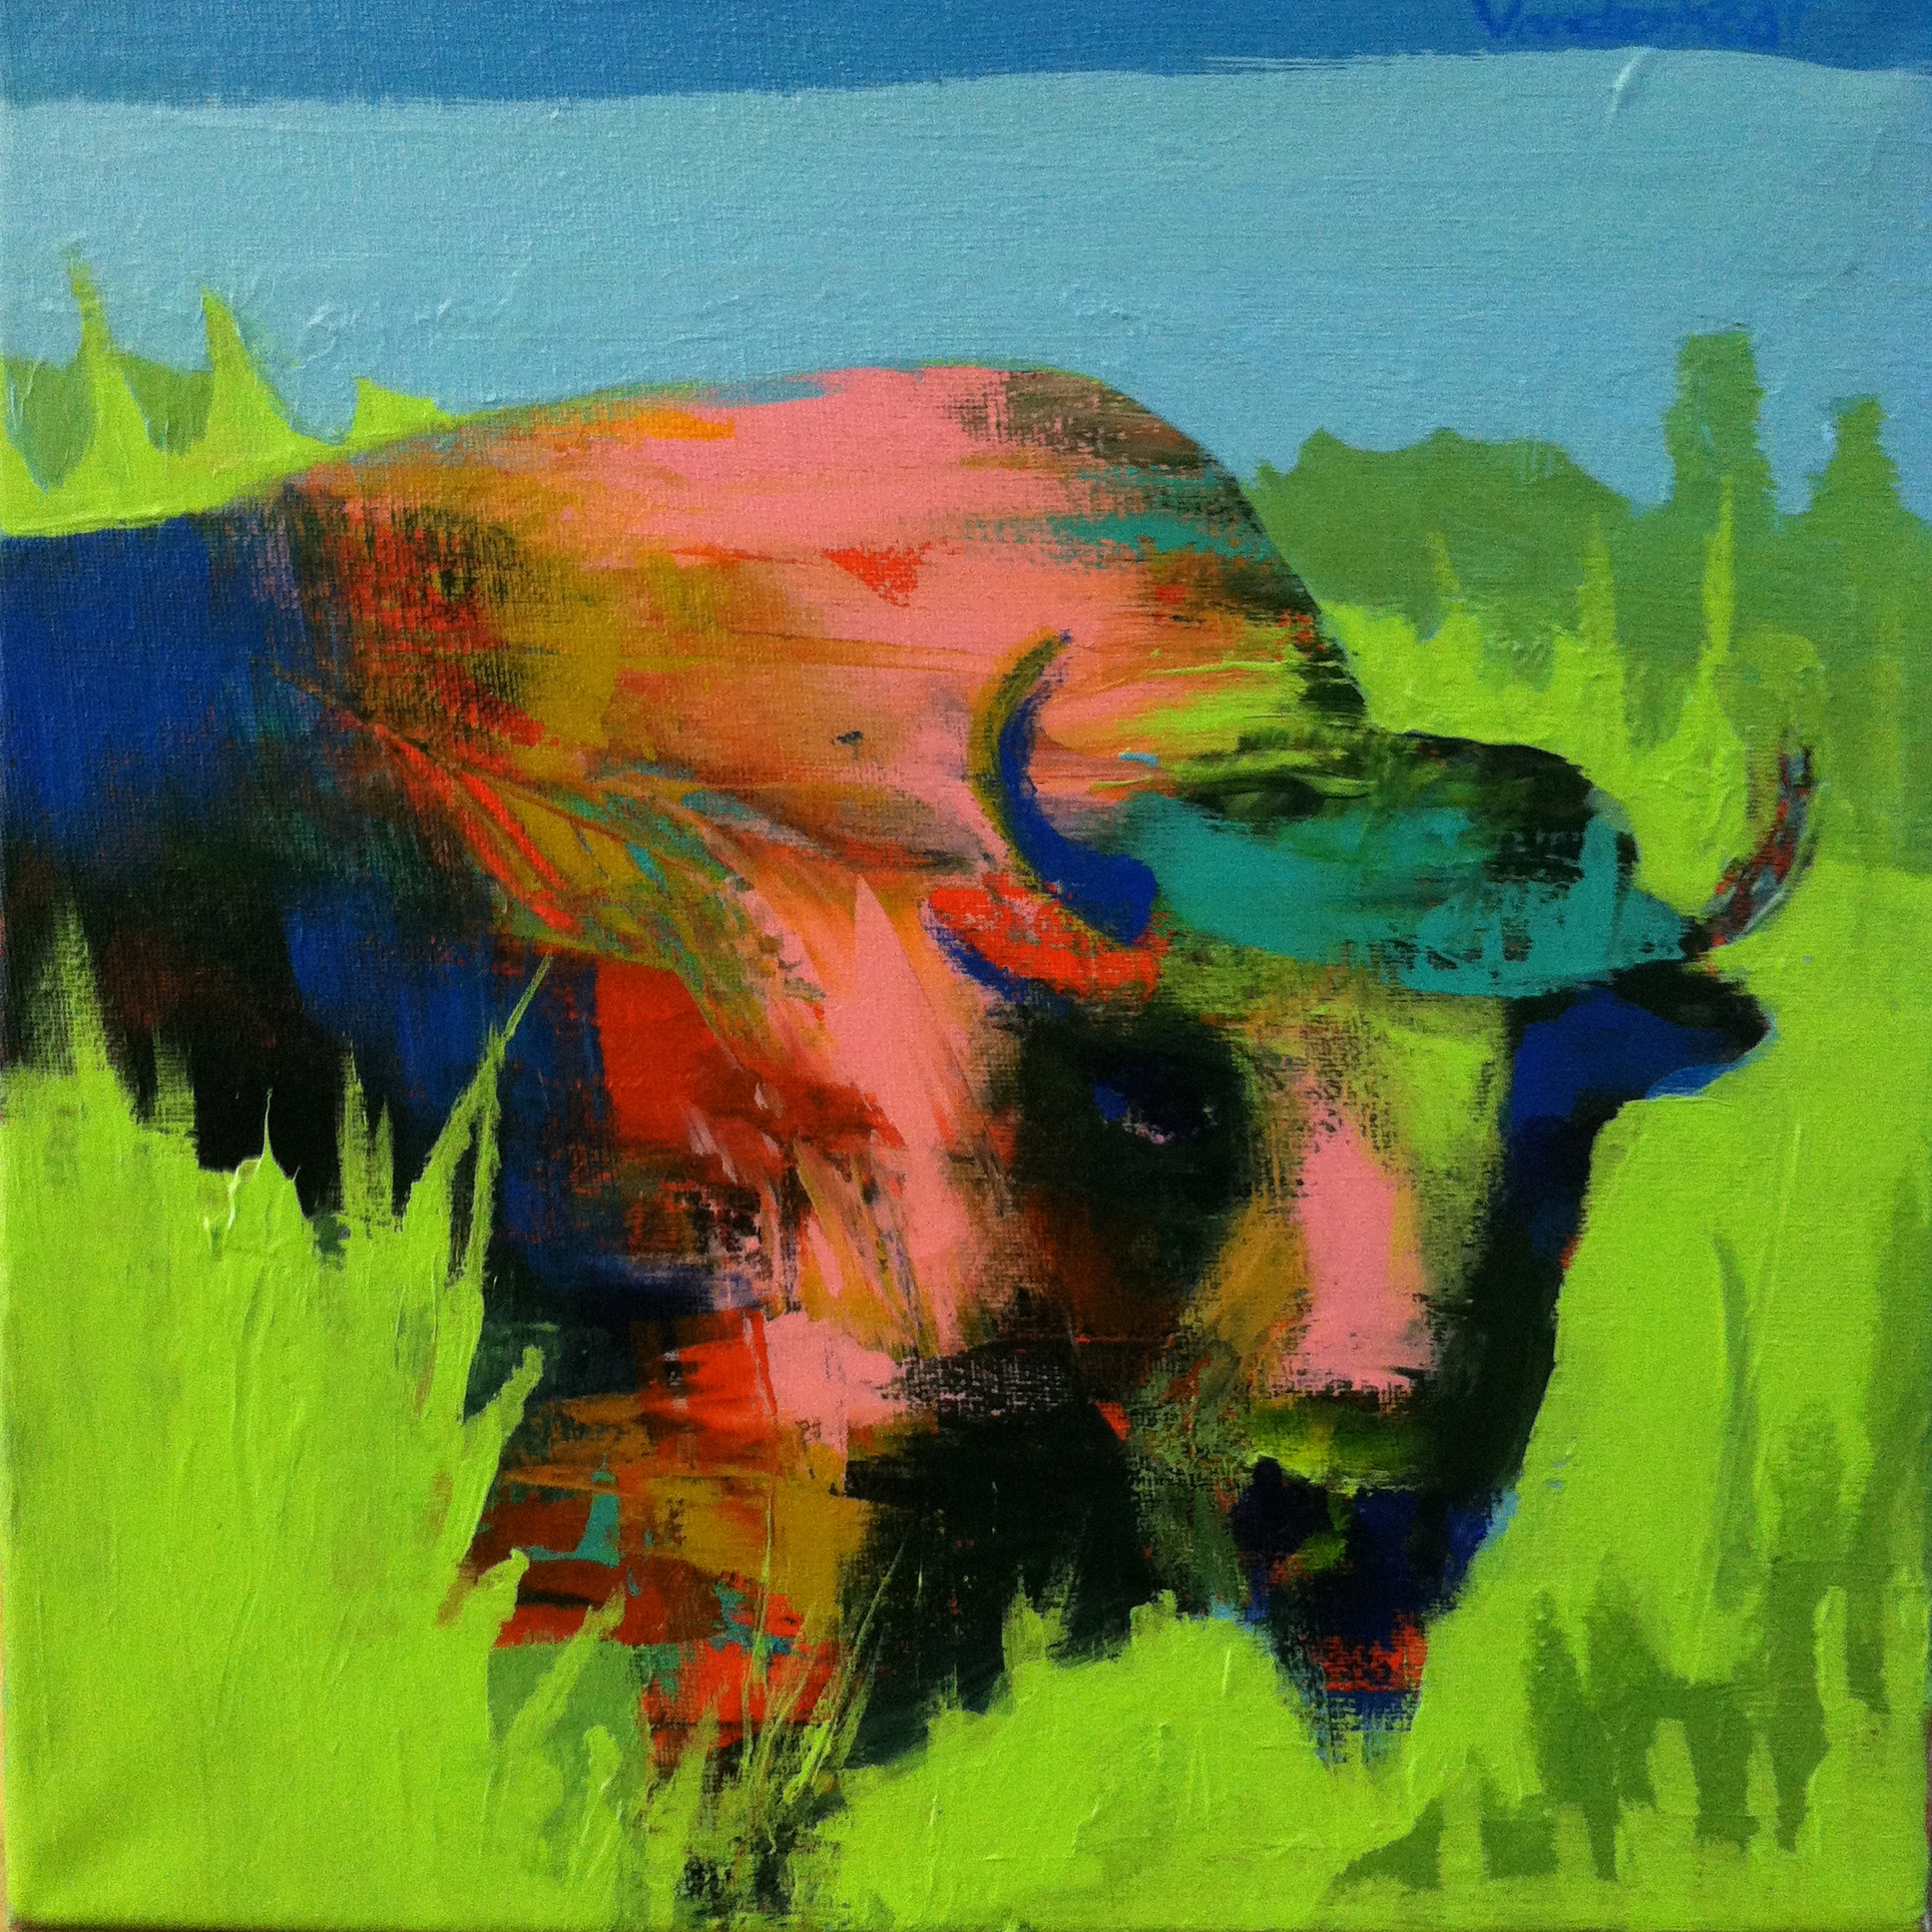  Bison in green, acrylic on canvas, 12x12 inches, 2015 